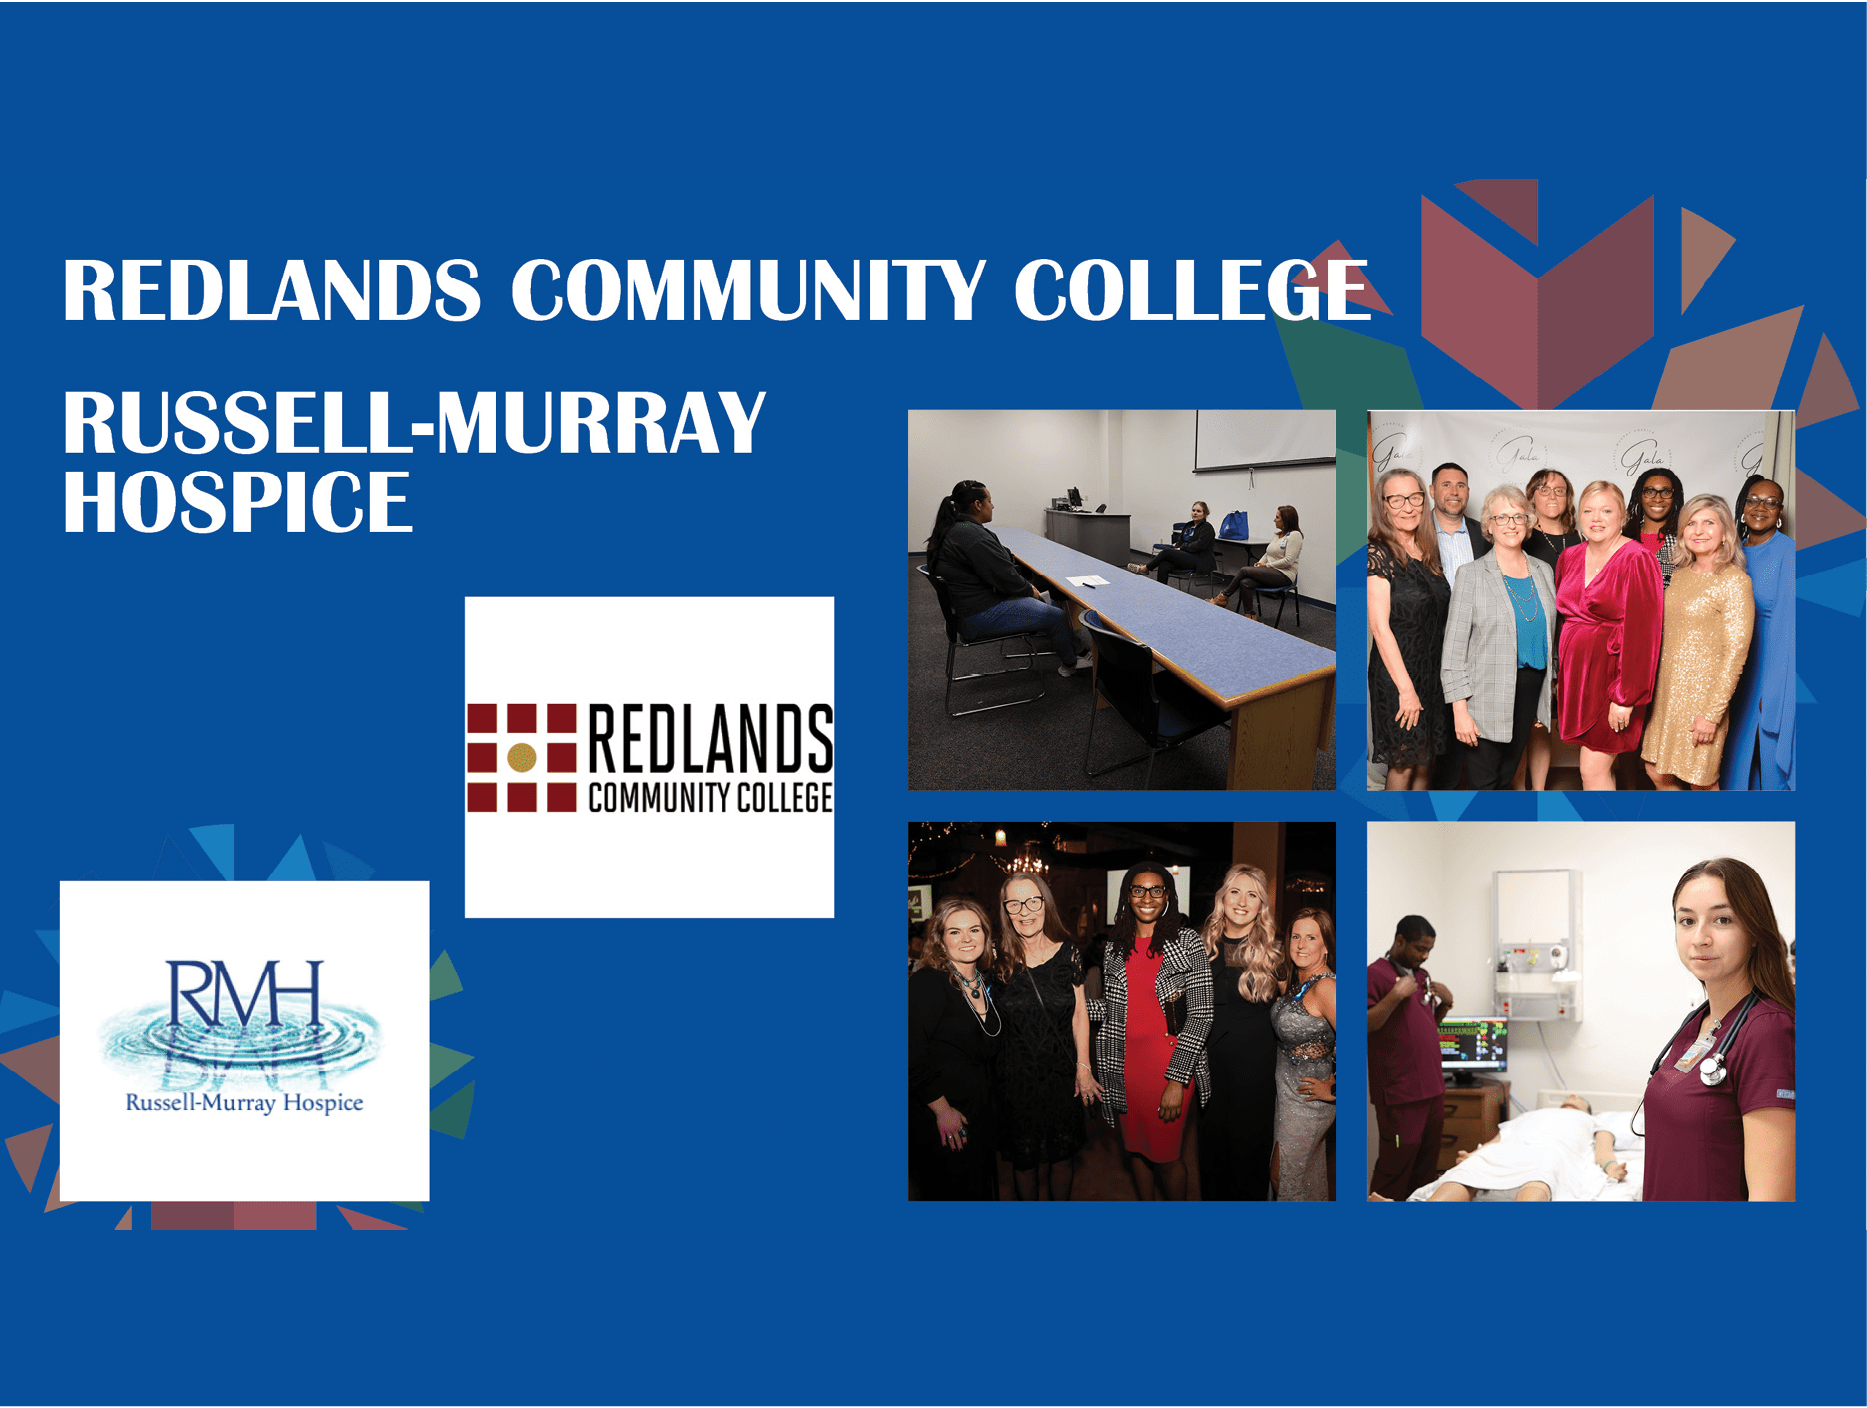 Redlands Community College and Russell-Murray Hospice